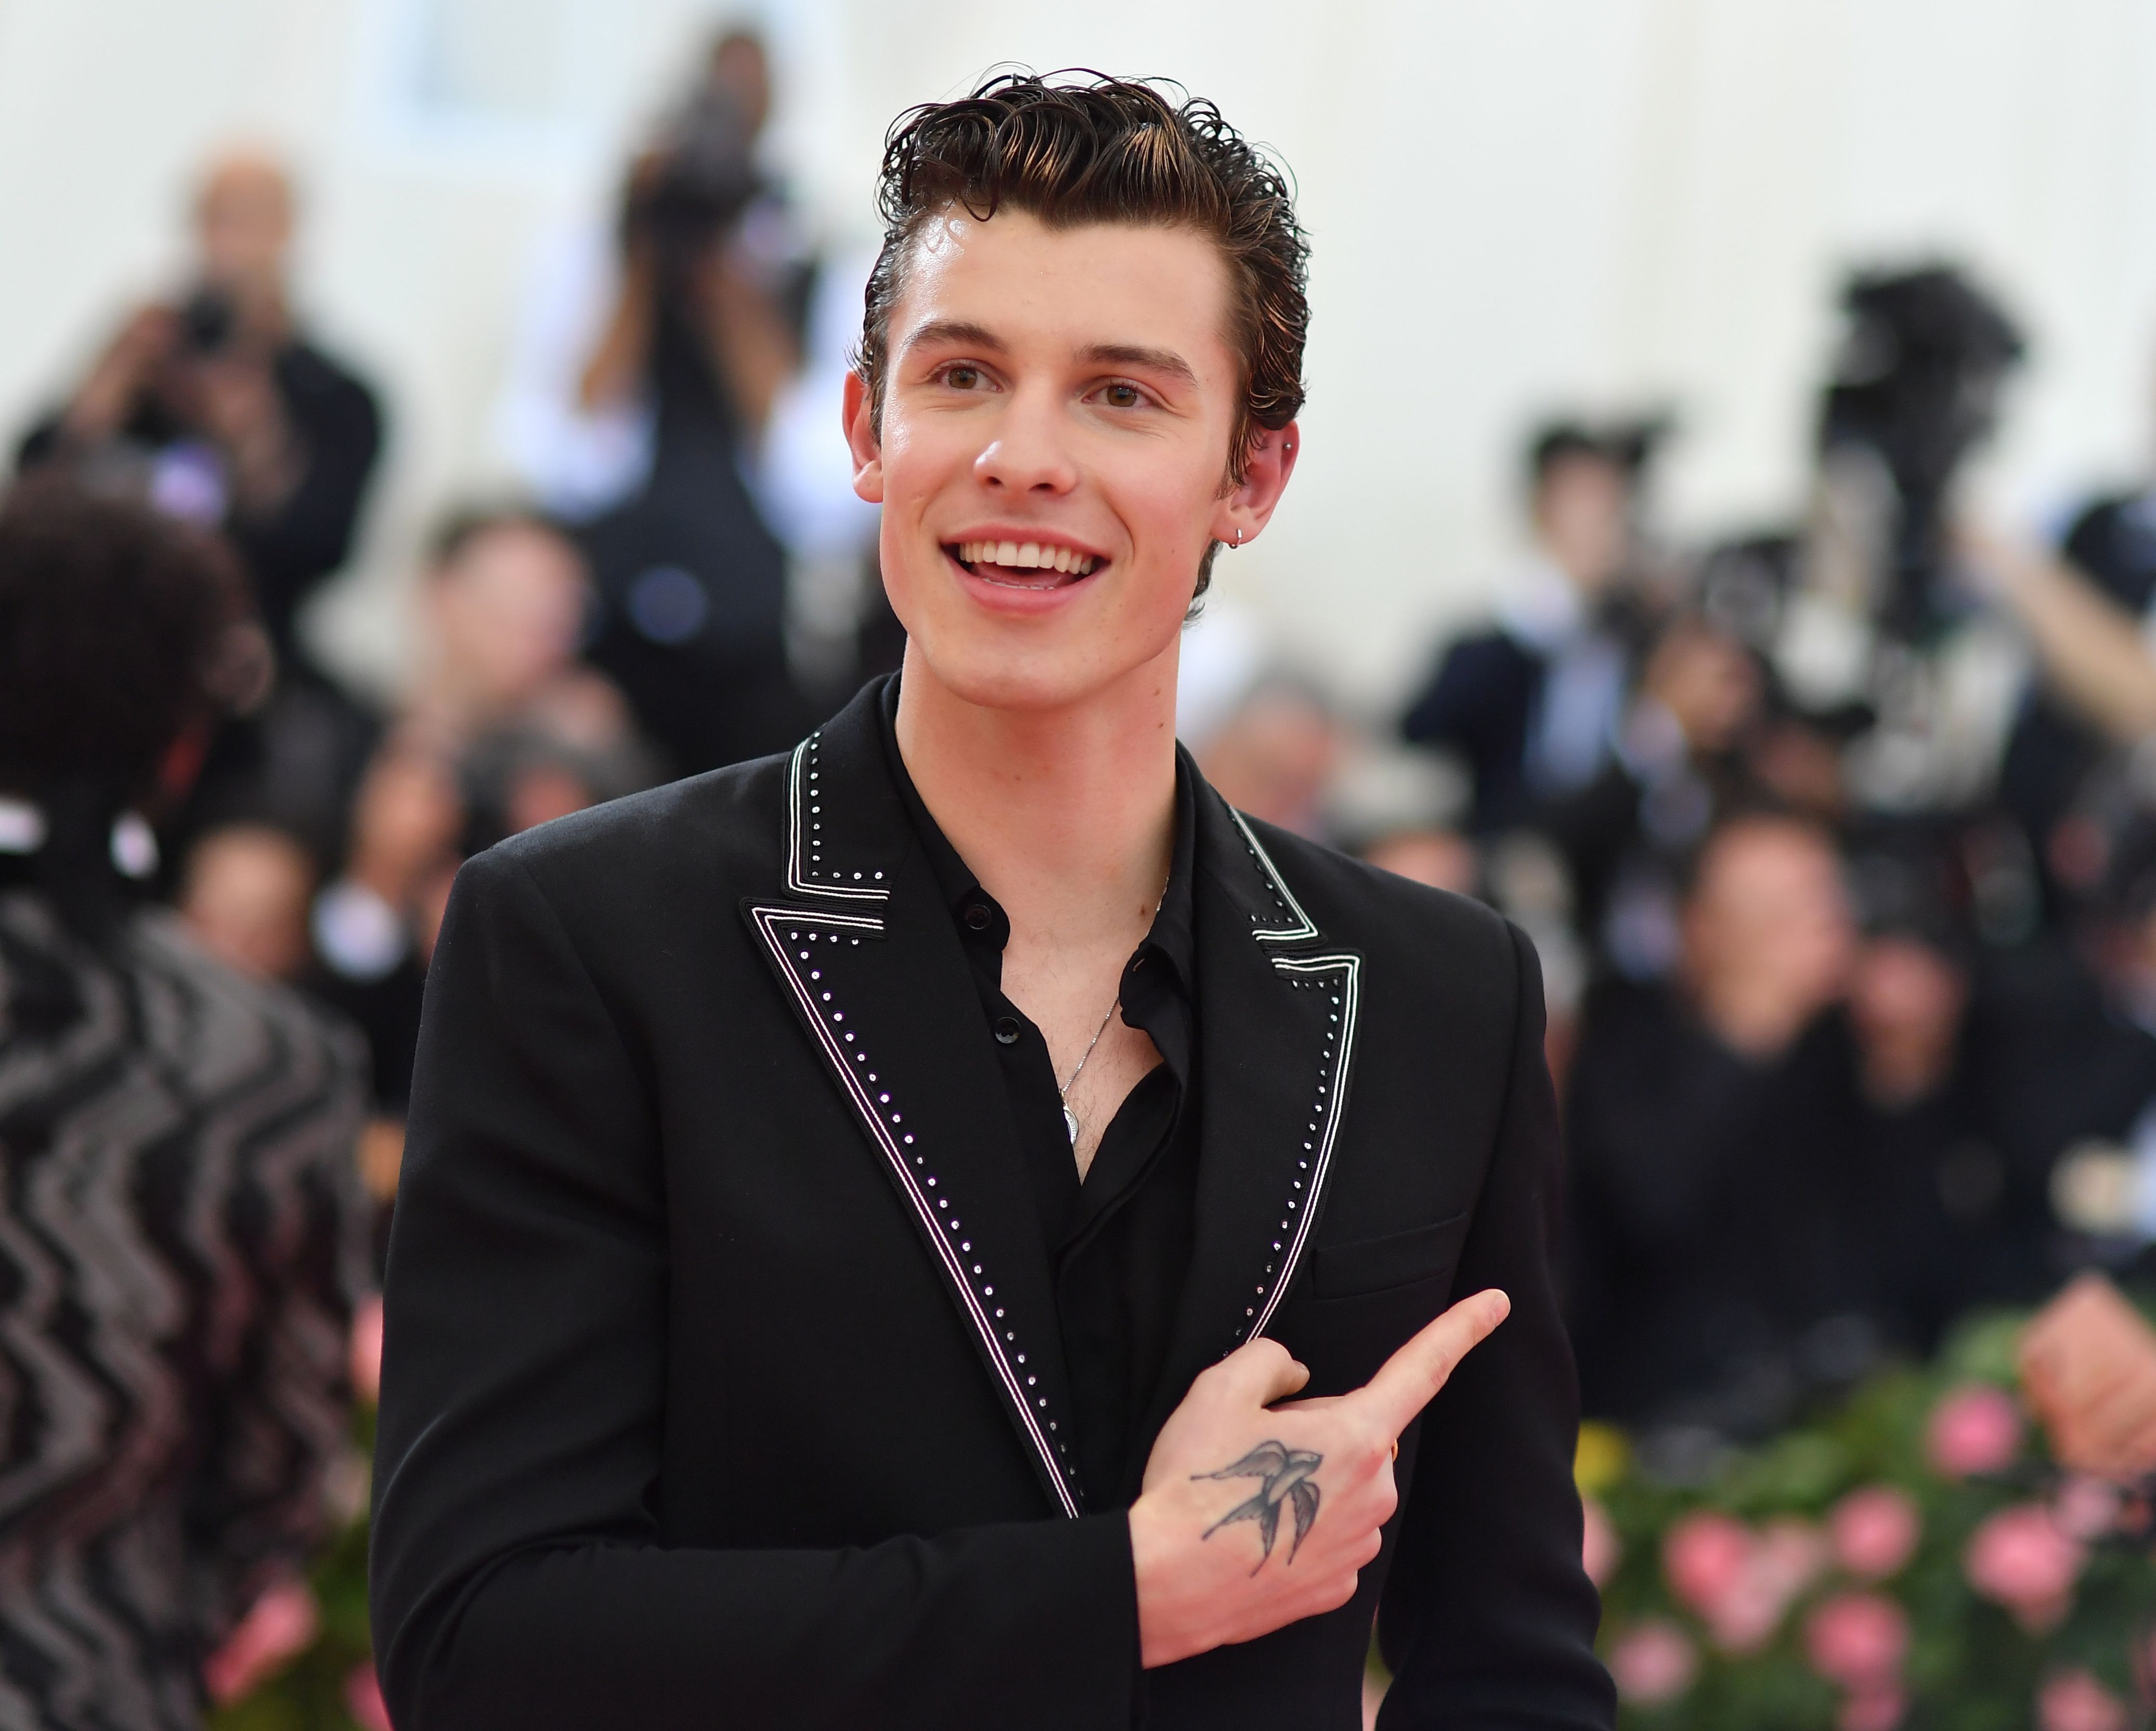 Shawn Mendes celebrates Grammy noms with sweat session